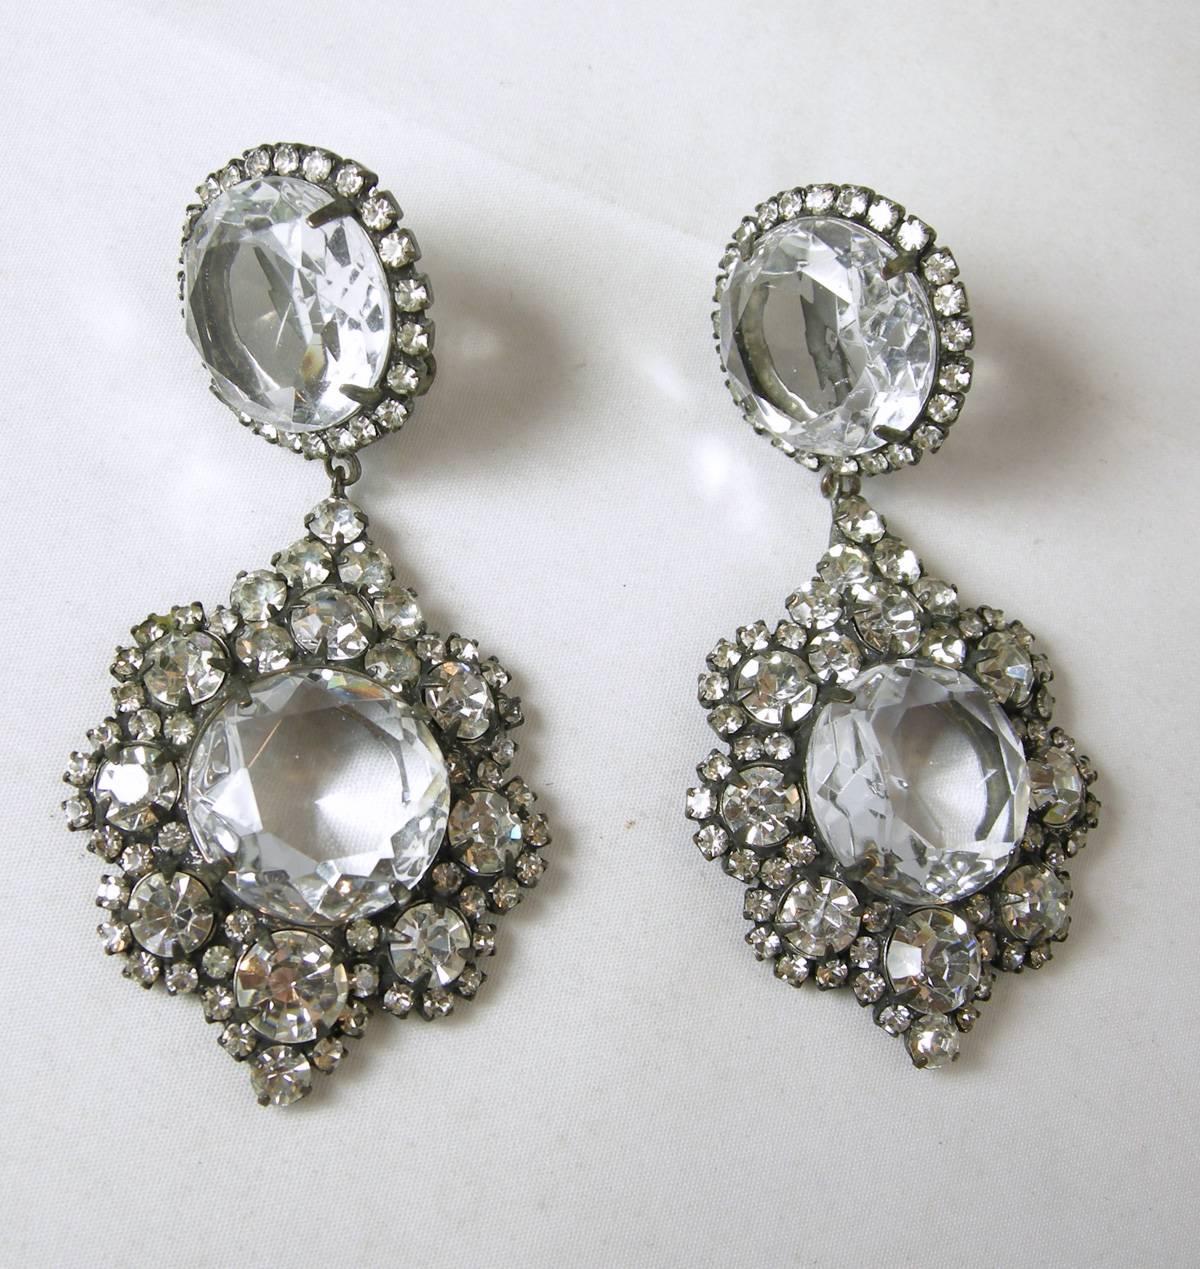 These are a pair of rare1960’s “K.J.L.” crystal drop earrings that are stunning! They feature a bold large centered clear crystal that will light up your face when you wear them. The center stone is surrounded by vibrant, floral crystal clusters.